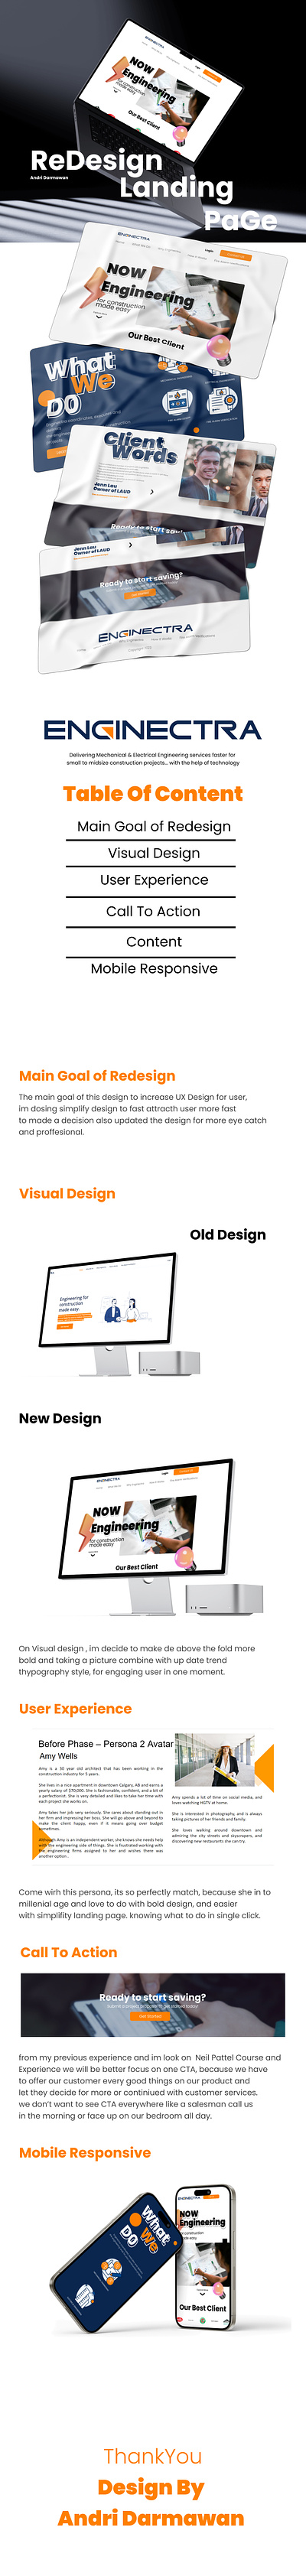 Redesign Landing Page Enginectra graphic design landing page redesign ui ux